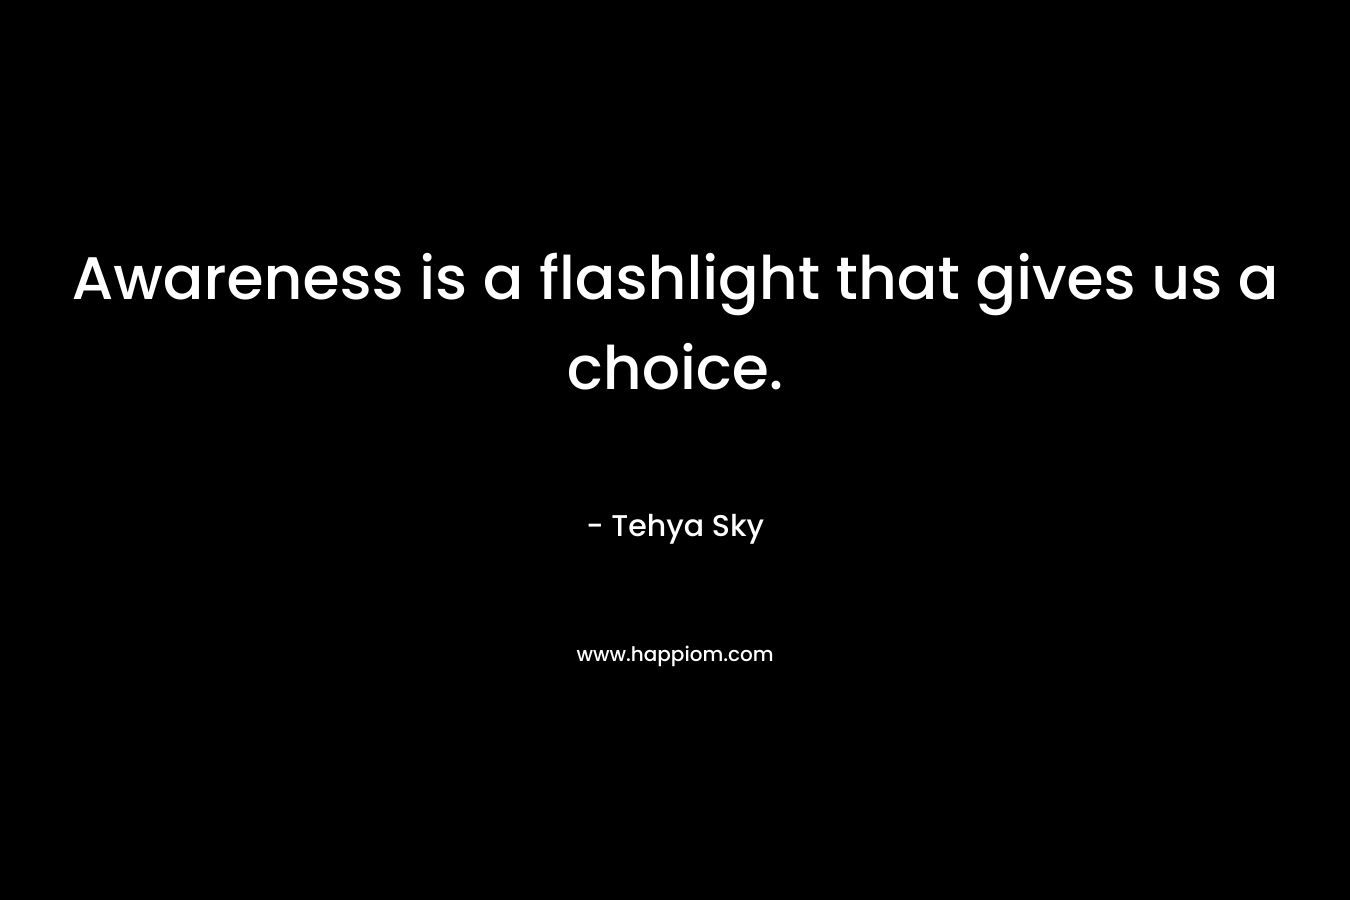 Awareness is a flashlight that gives us a choice. – Tehya Sky